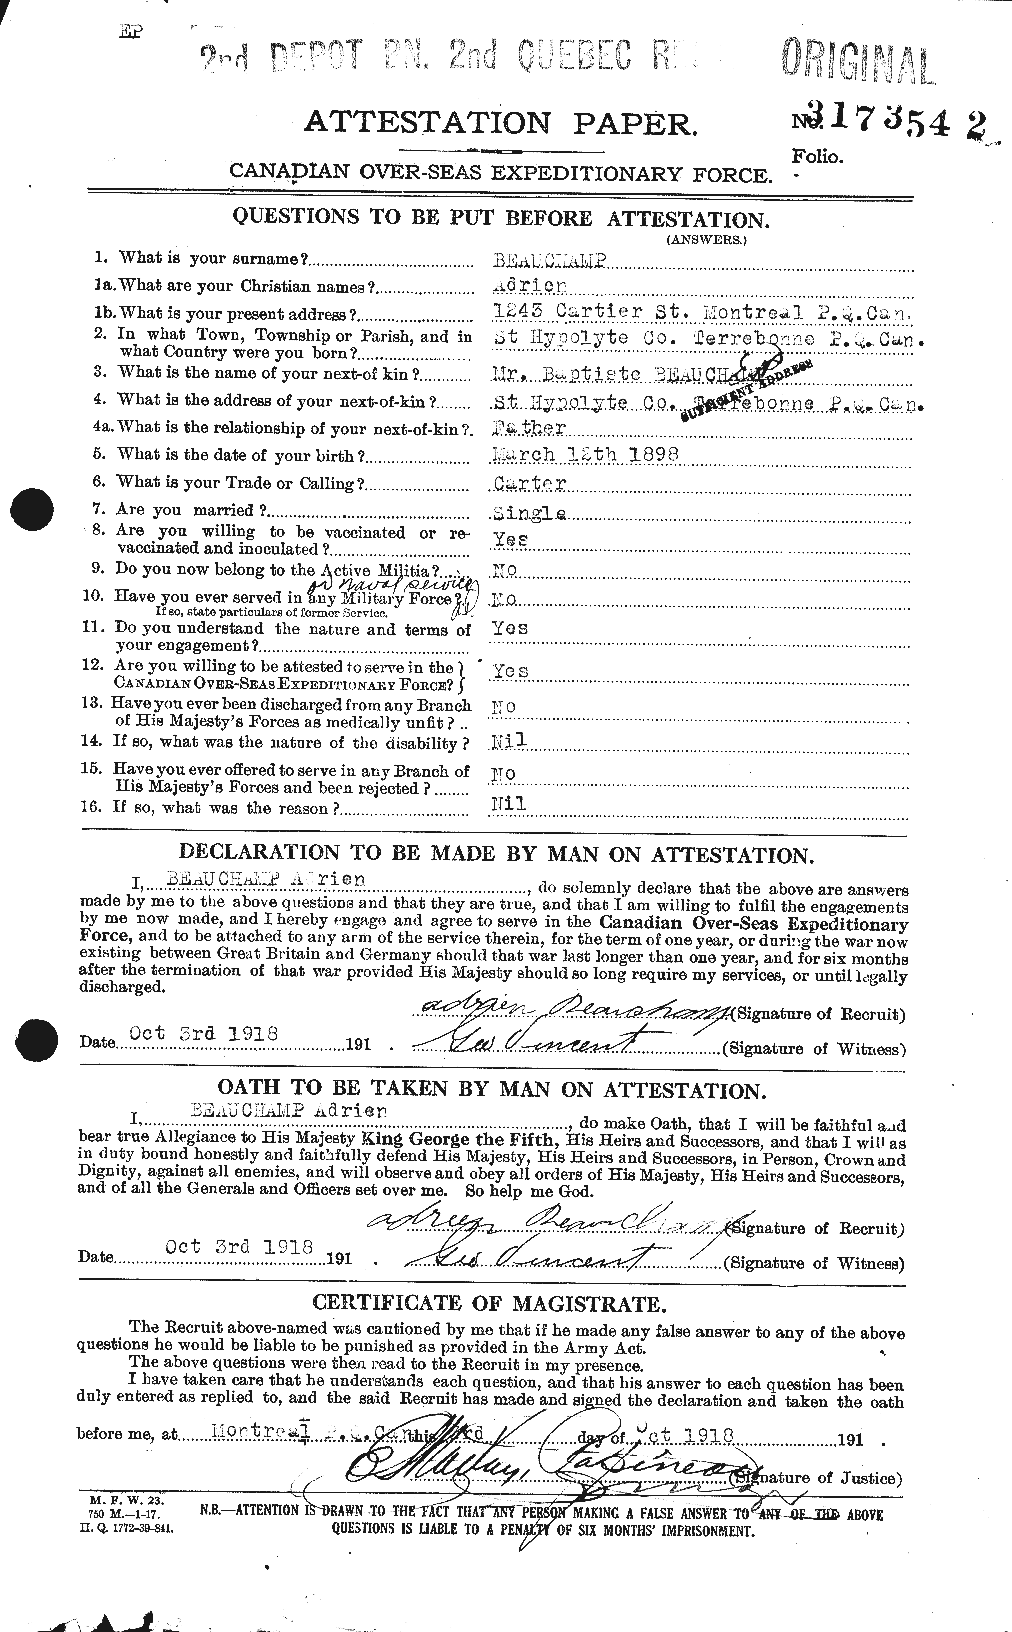 Personnel Records of the First World War - CEF 230926a